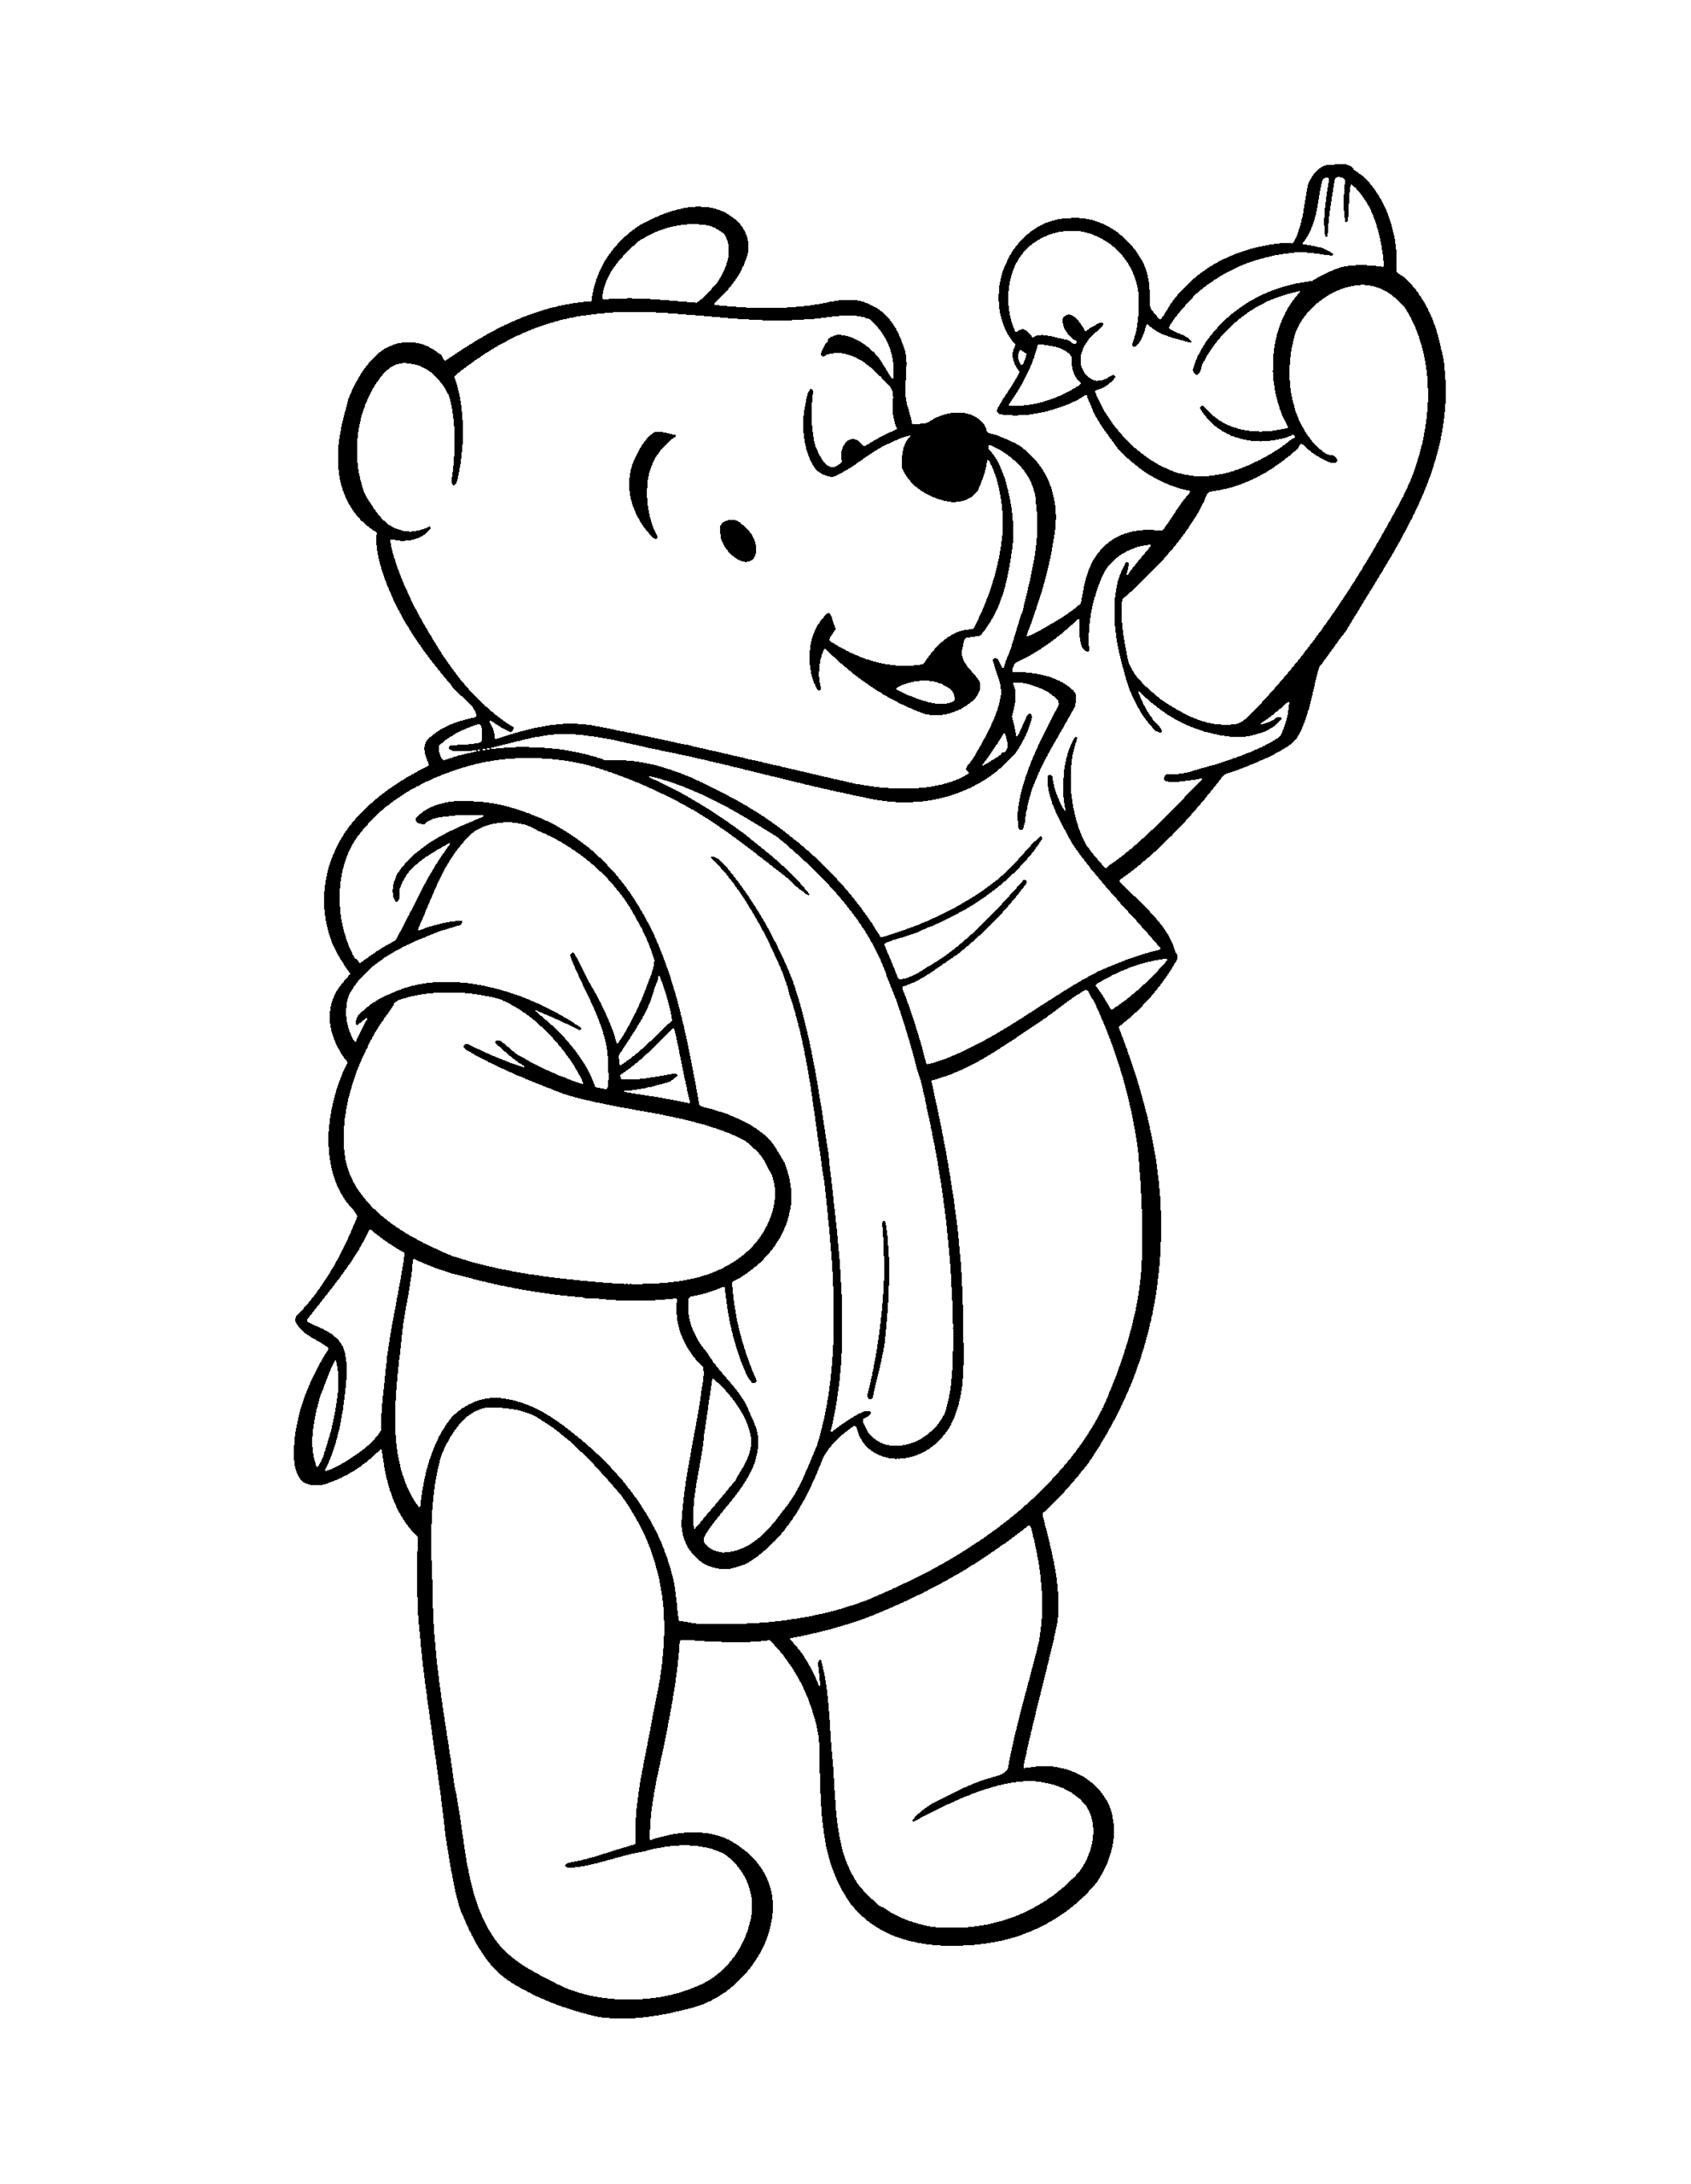 Winnie the Pooh Coloring Pages Cartoons winnie the pooh 99 Printable 2020 7222 Coloring4free